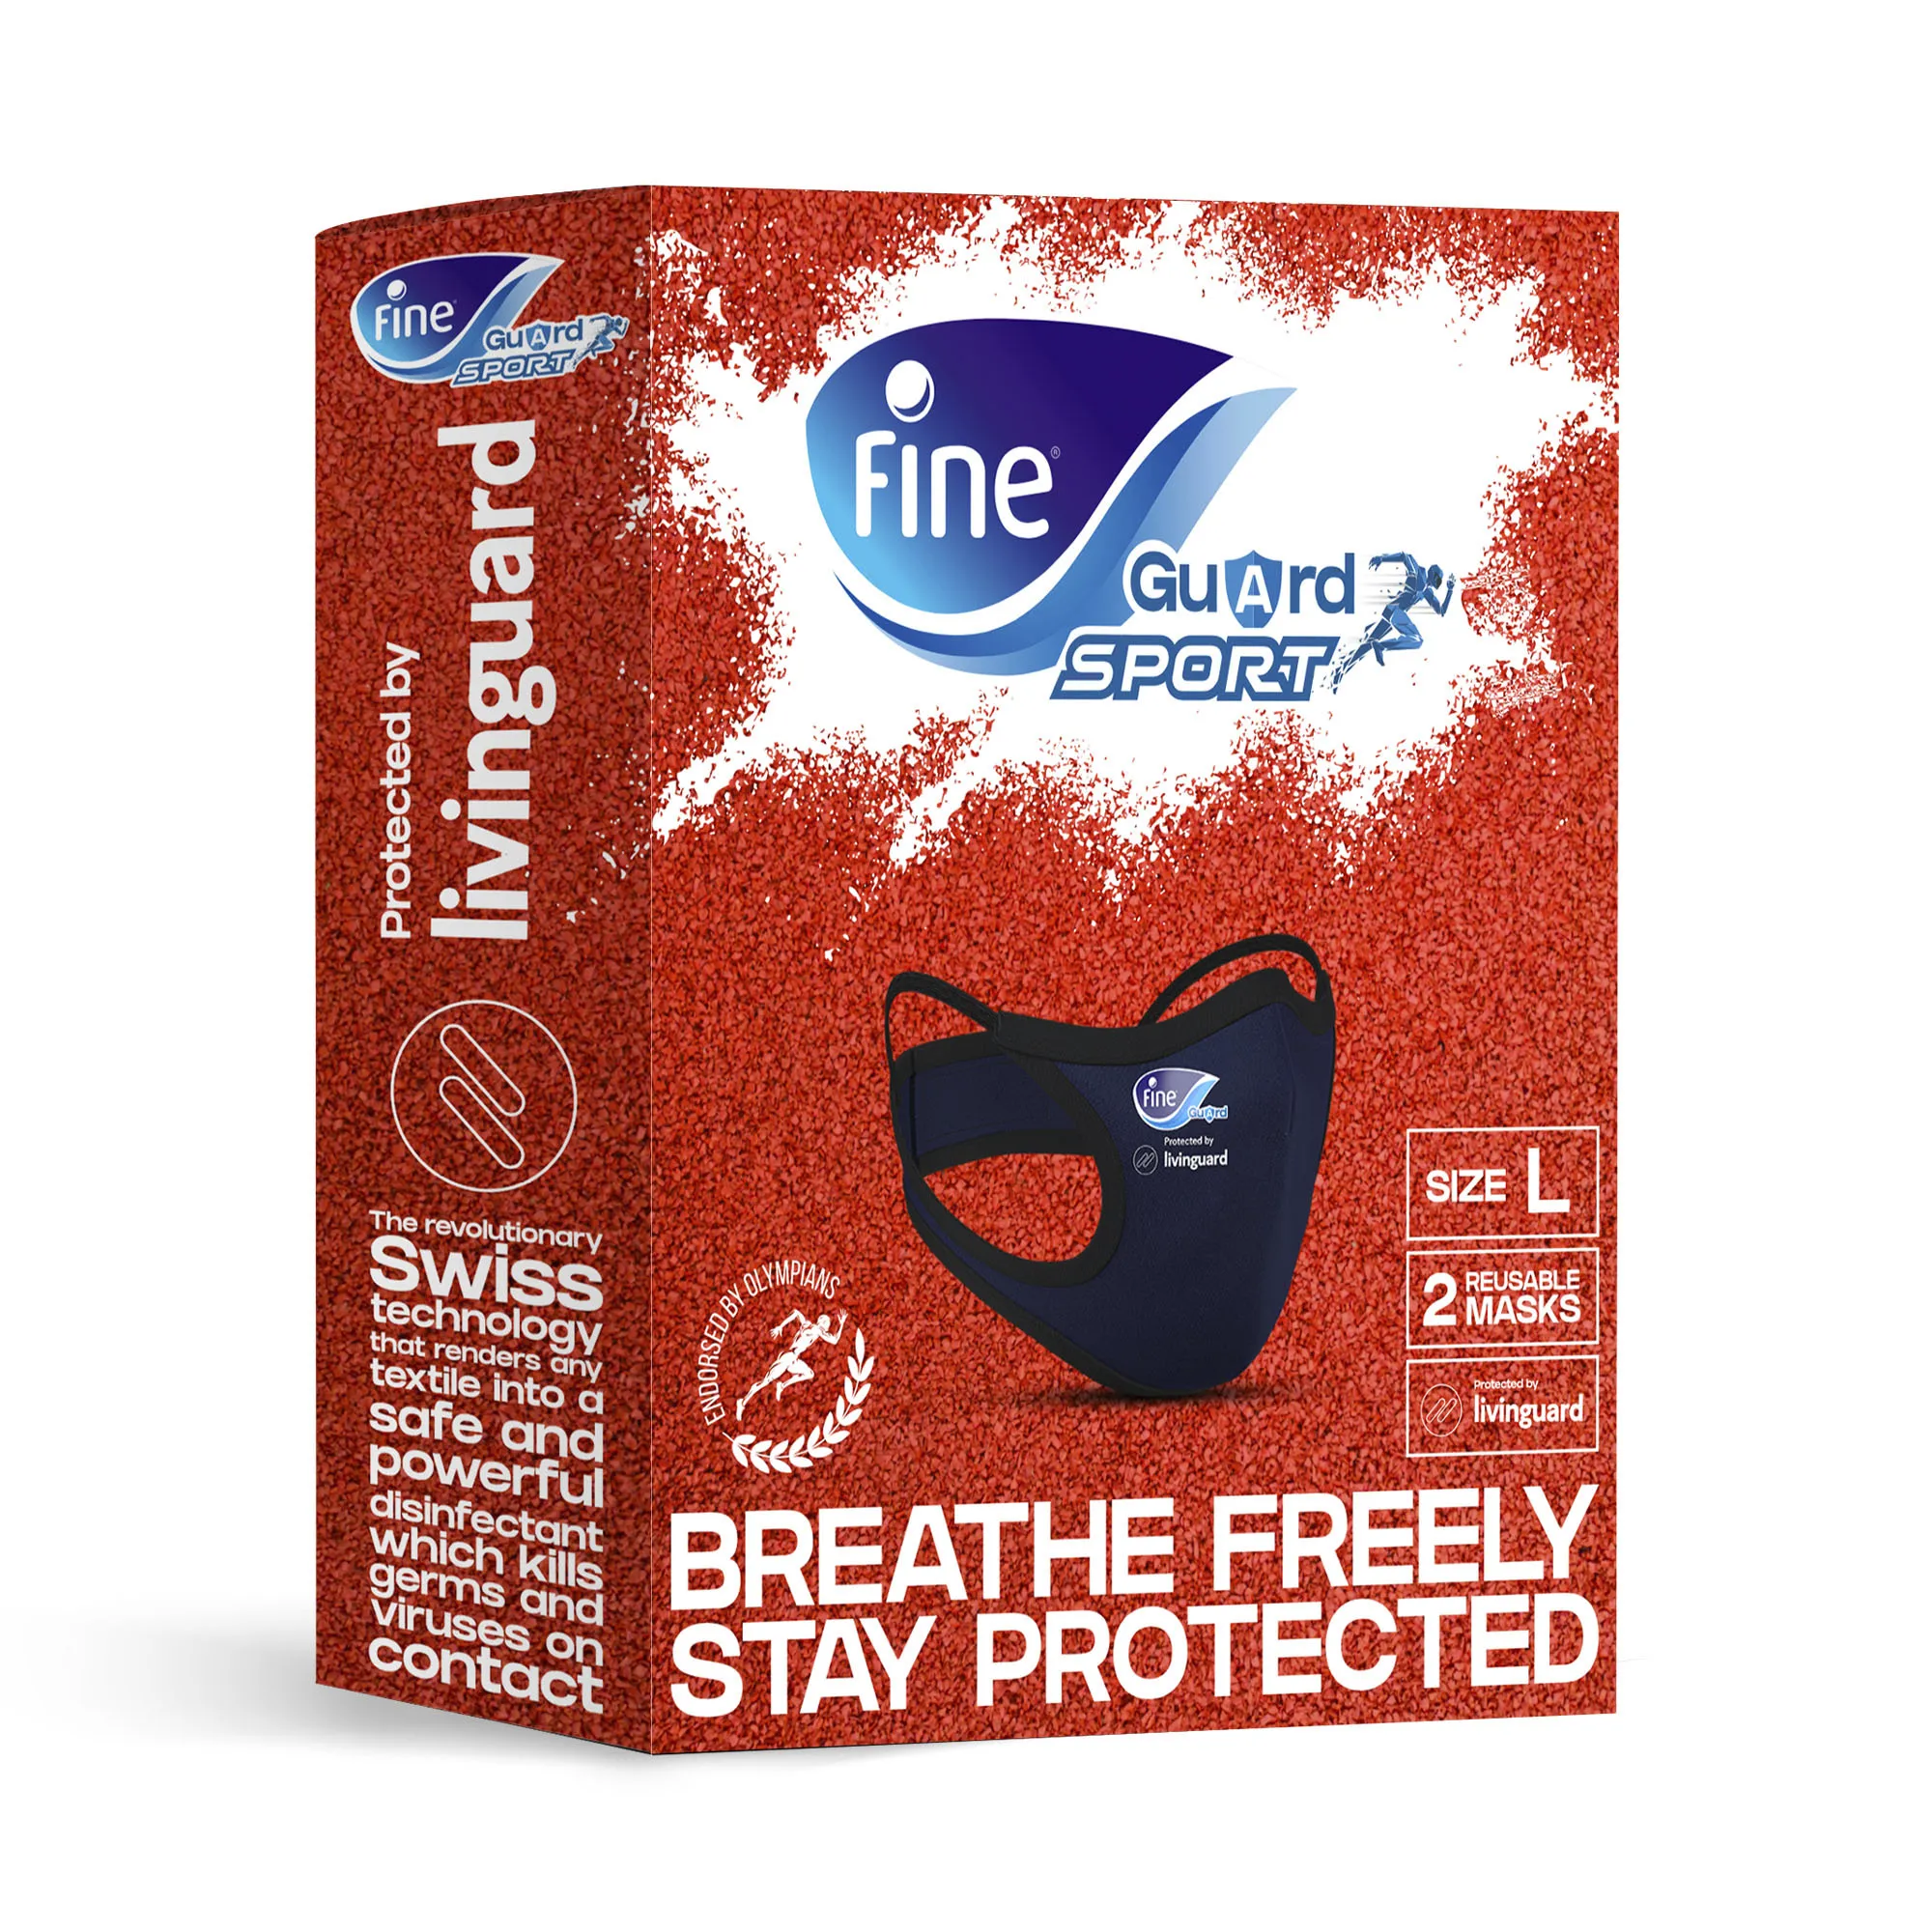 Fine Guard Sports Anti-Viral Face Mask, Olympian Endorsed, Running, Gym, Fitness, Yoga, Cycling 2 x Reusable masks per pack Large